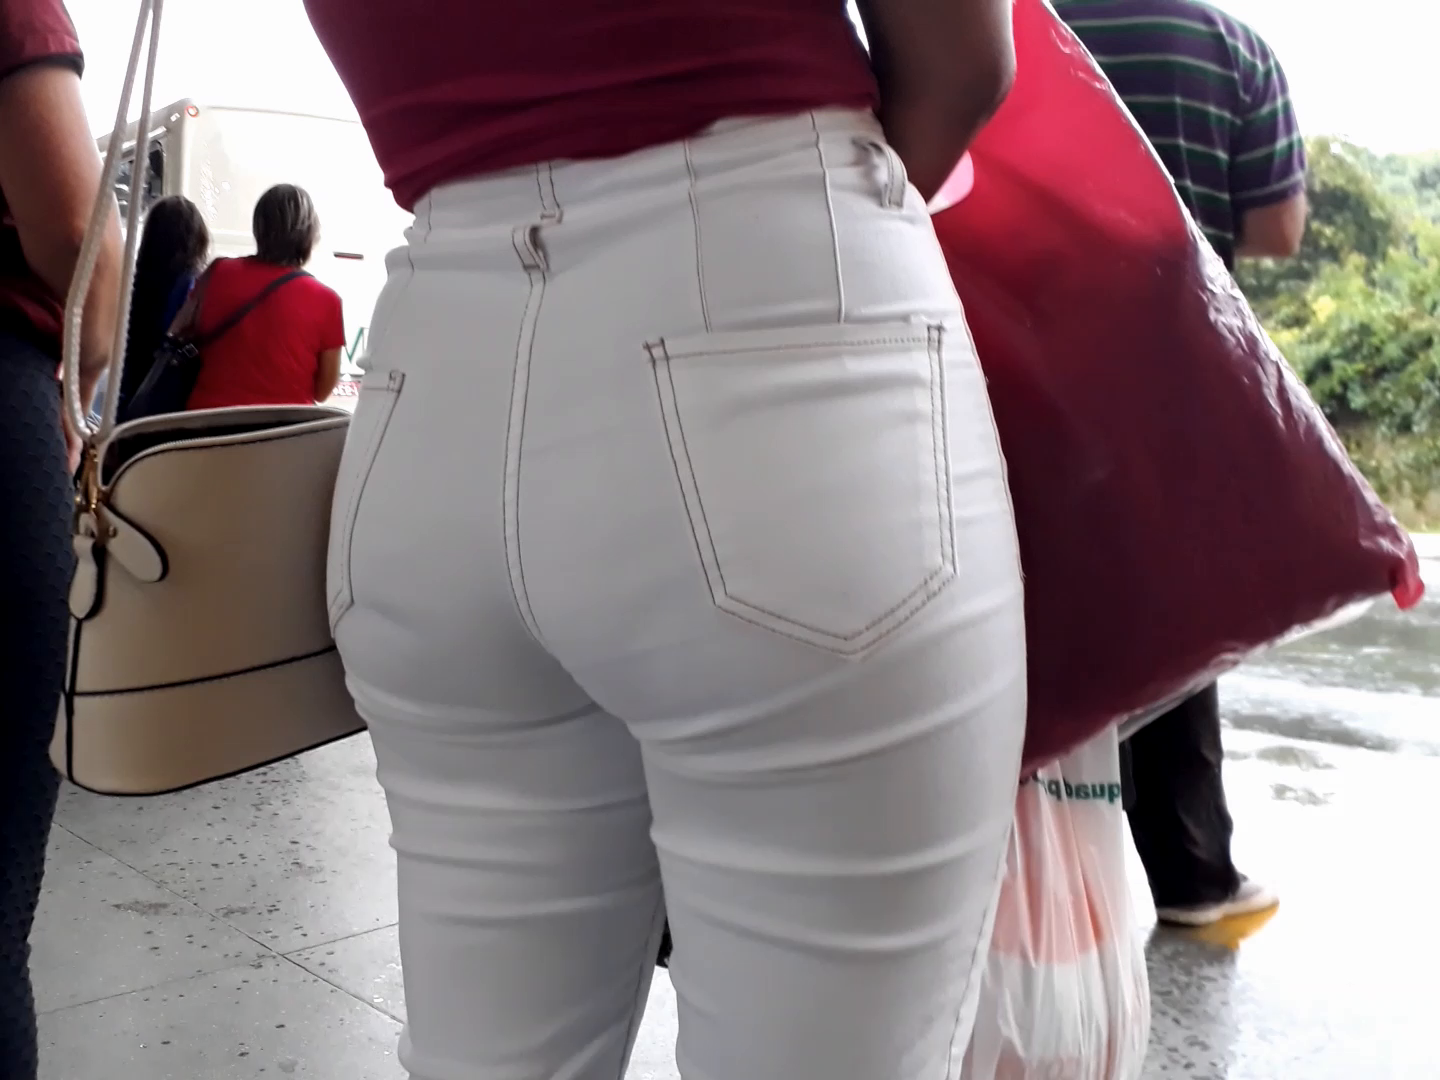 candid - Juicy Ass in Tight White Jeans - Porn